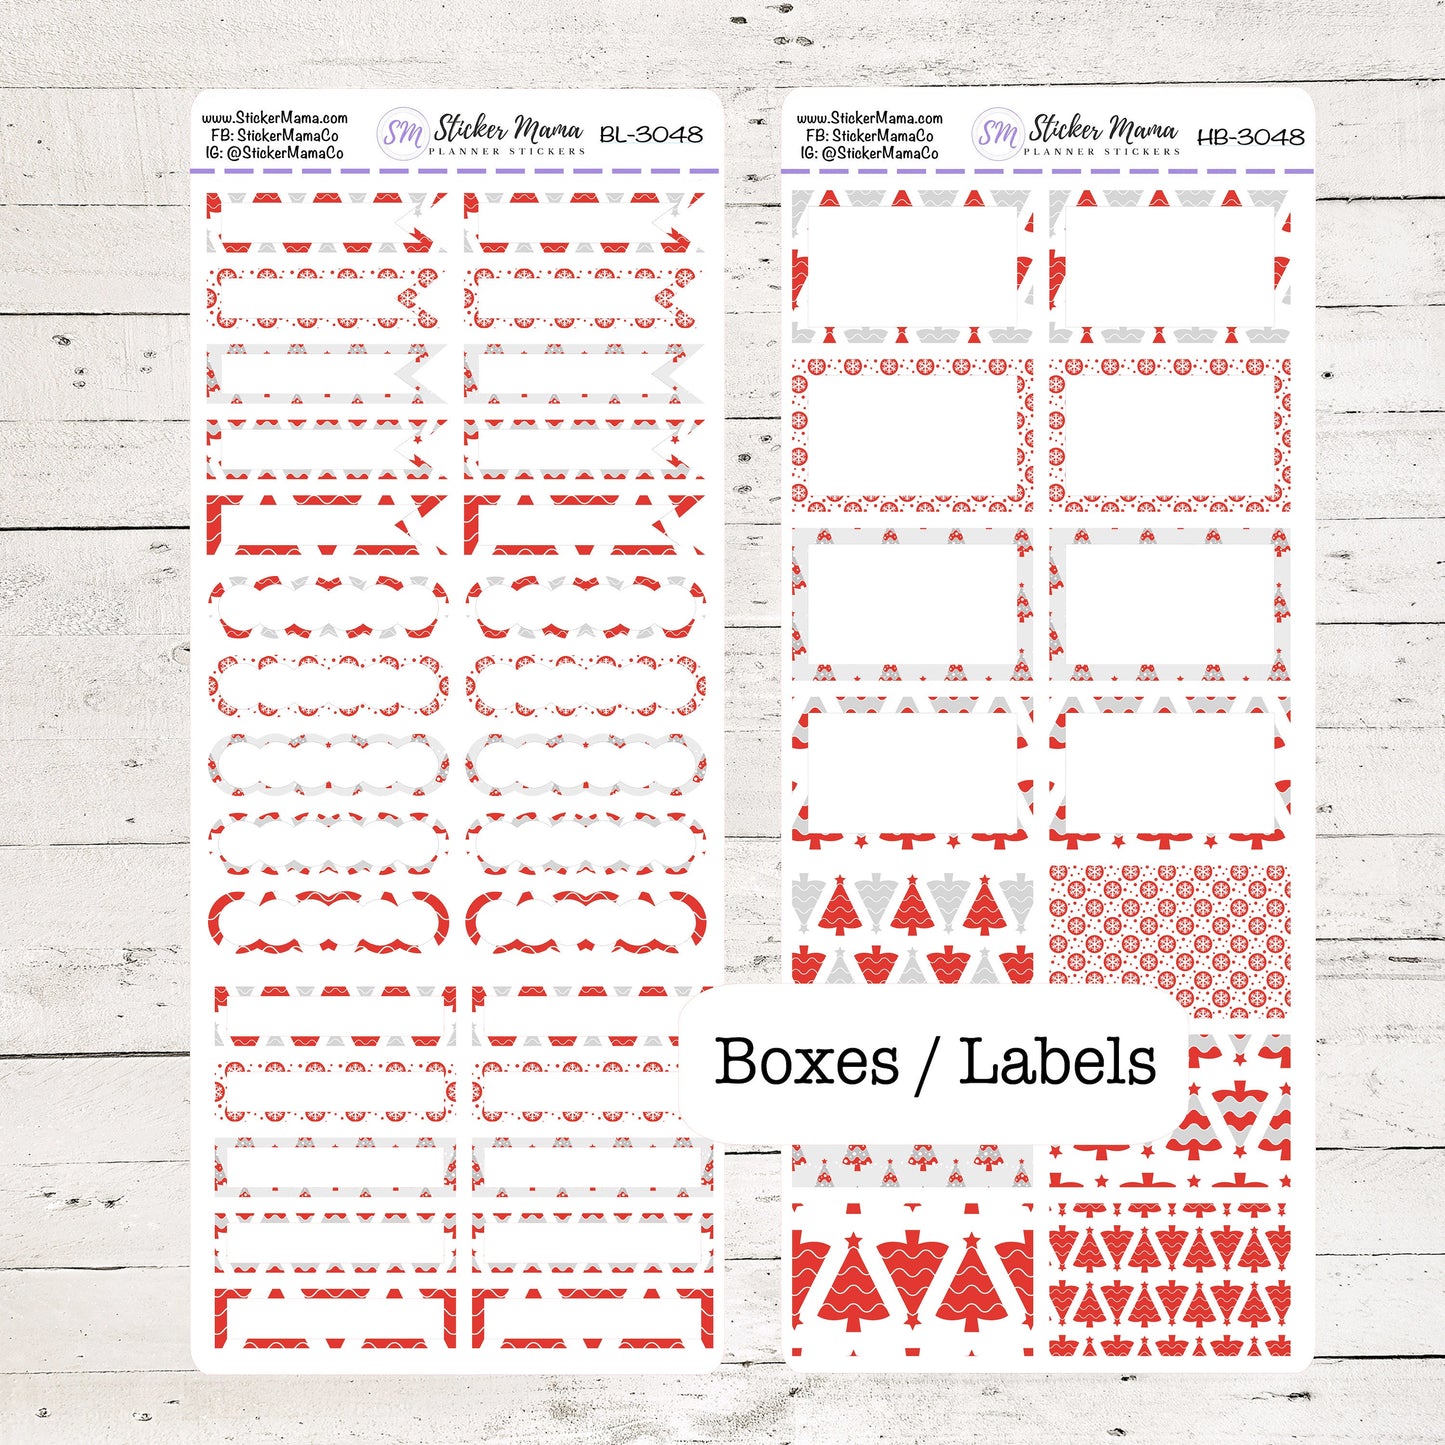 BL-3048 - HB-3058 BASIC Label Stickers - New Christmas - Half Boxes - Planner Stickers - Full Box for Planners